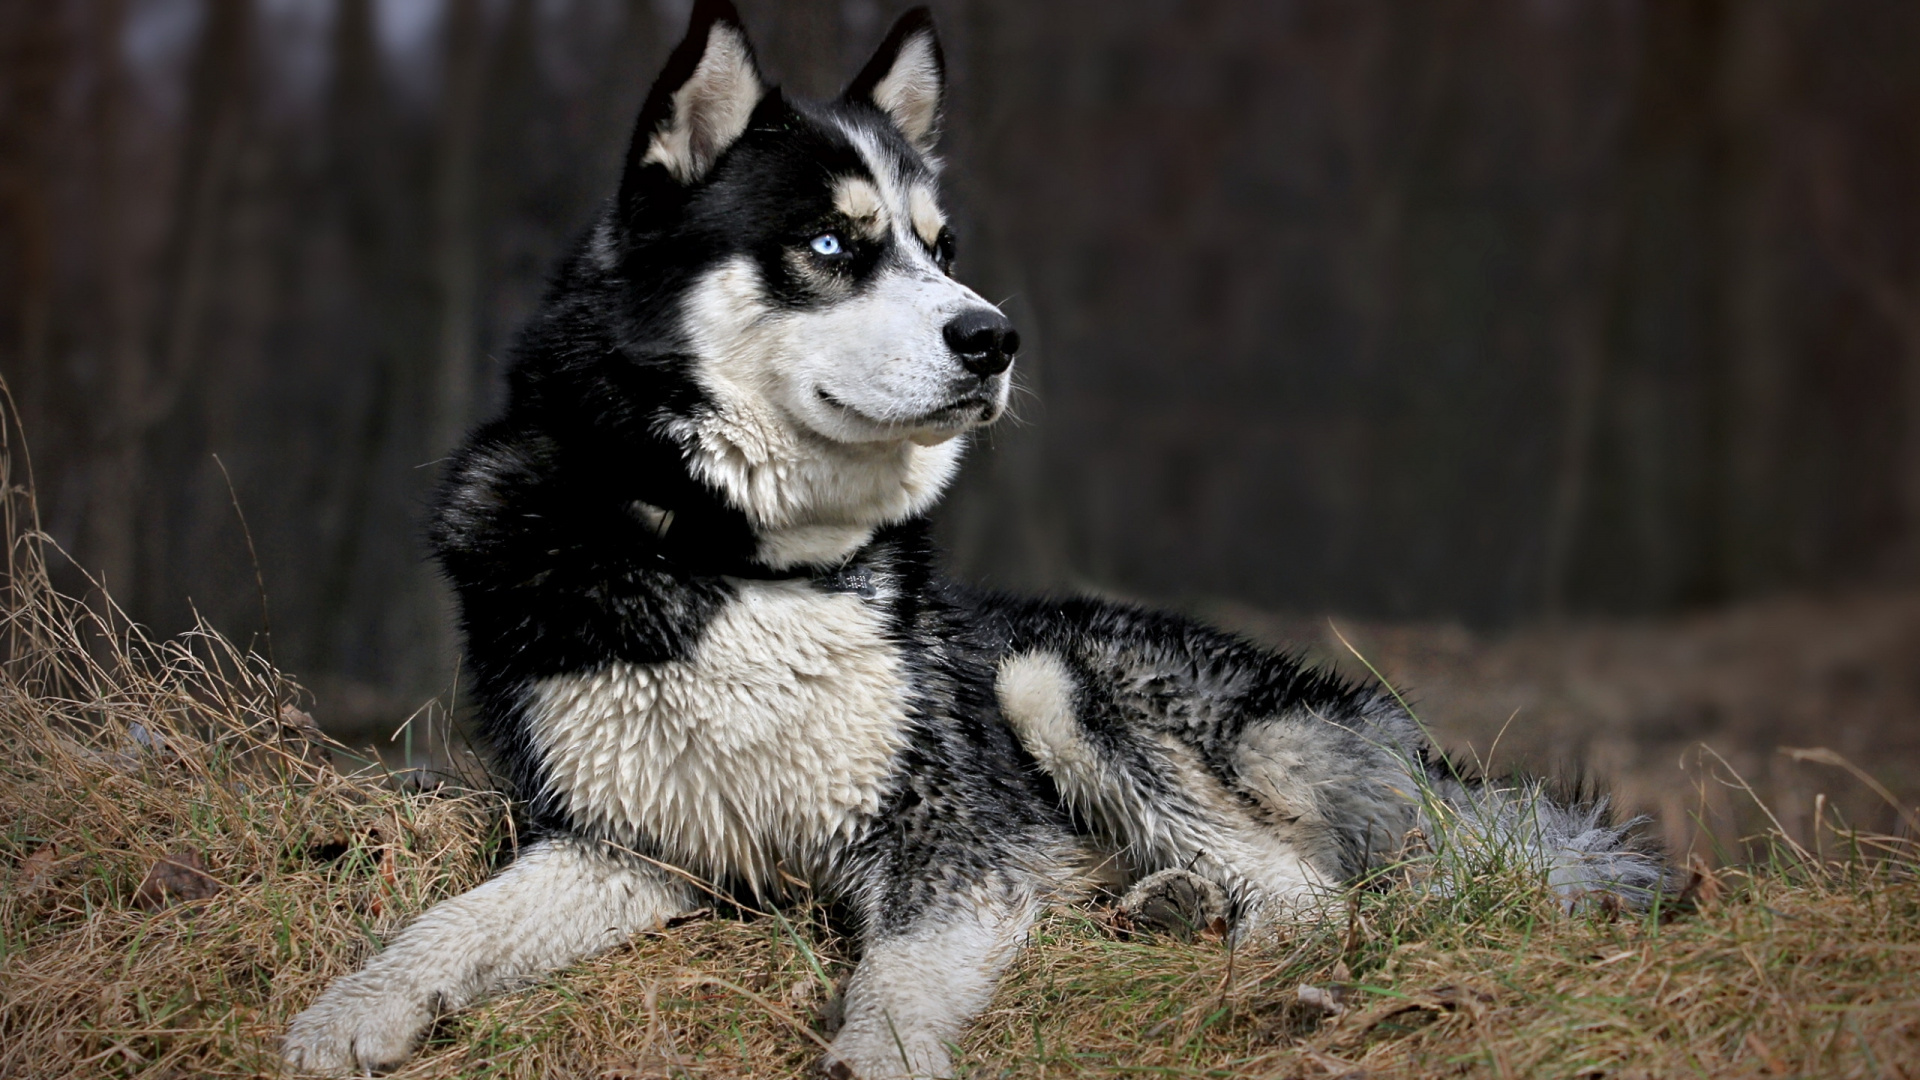 Black and White Siberian Husky Puppy on Brown Grass Field During Daytime. Wallpaper in 1920x1080 Resolution